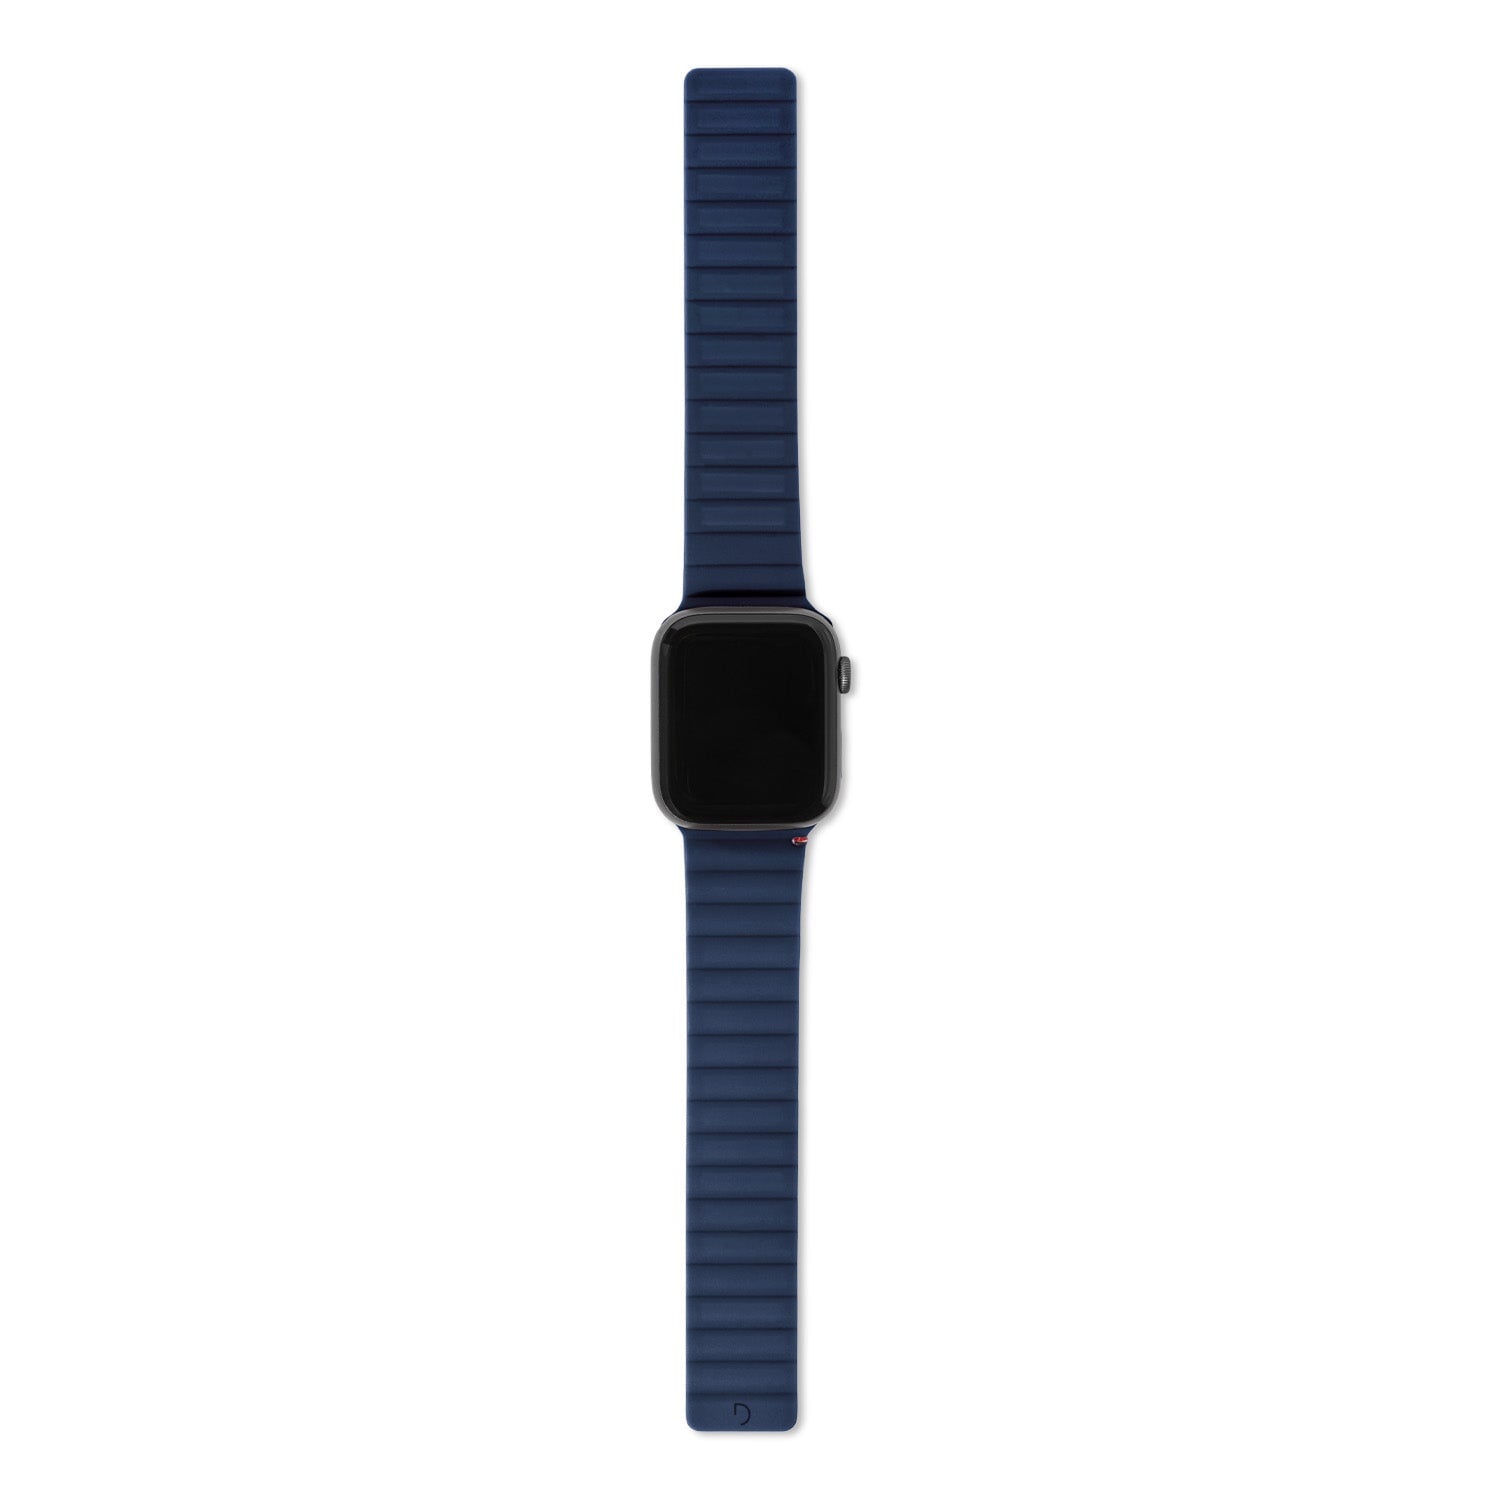 Silicone Magnetic Traction Strap Lite Apple Watch SE 44mm, Matte Navy